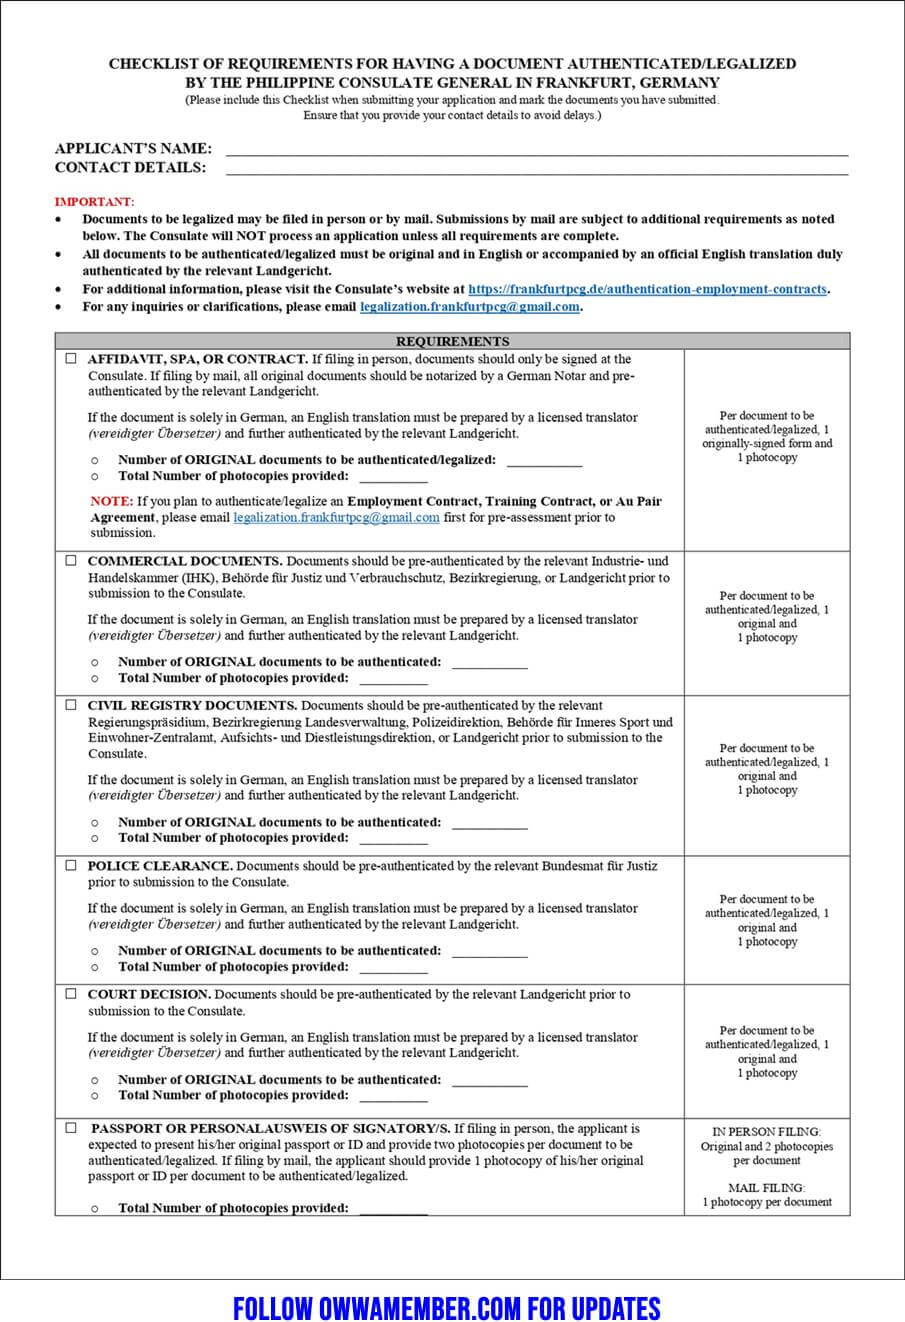 Checklist-for-Authentication-Legalization Frankfurt Germany ASG_page-0001